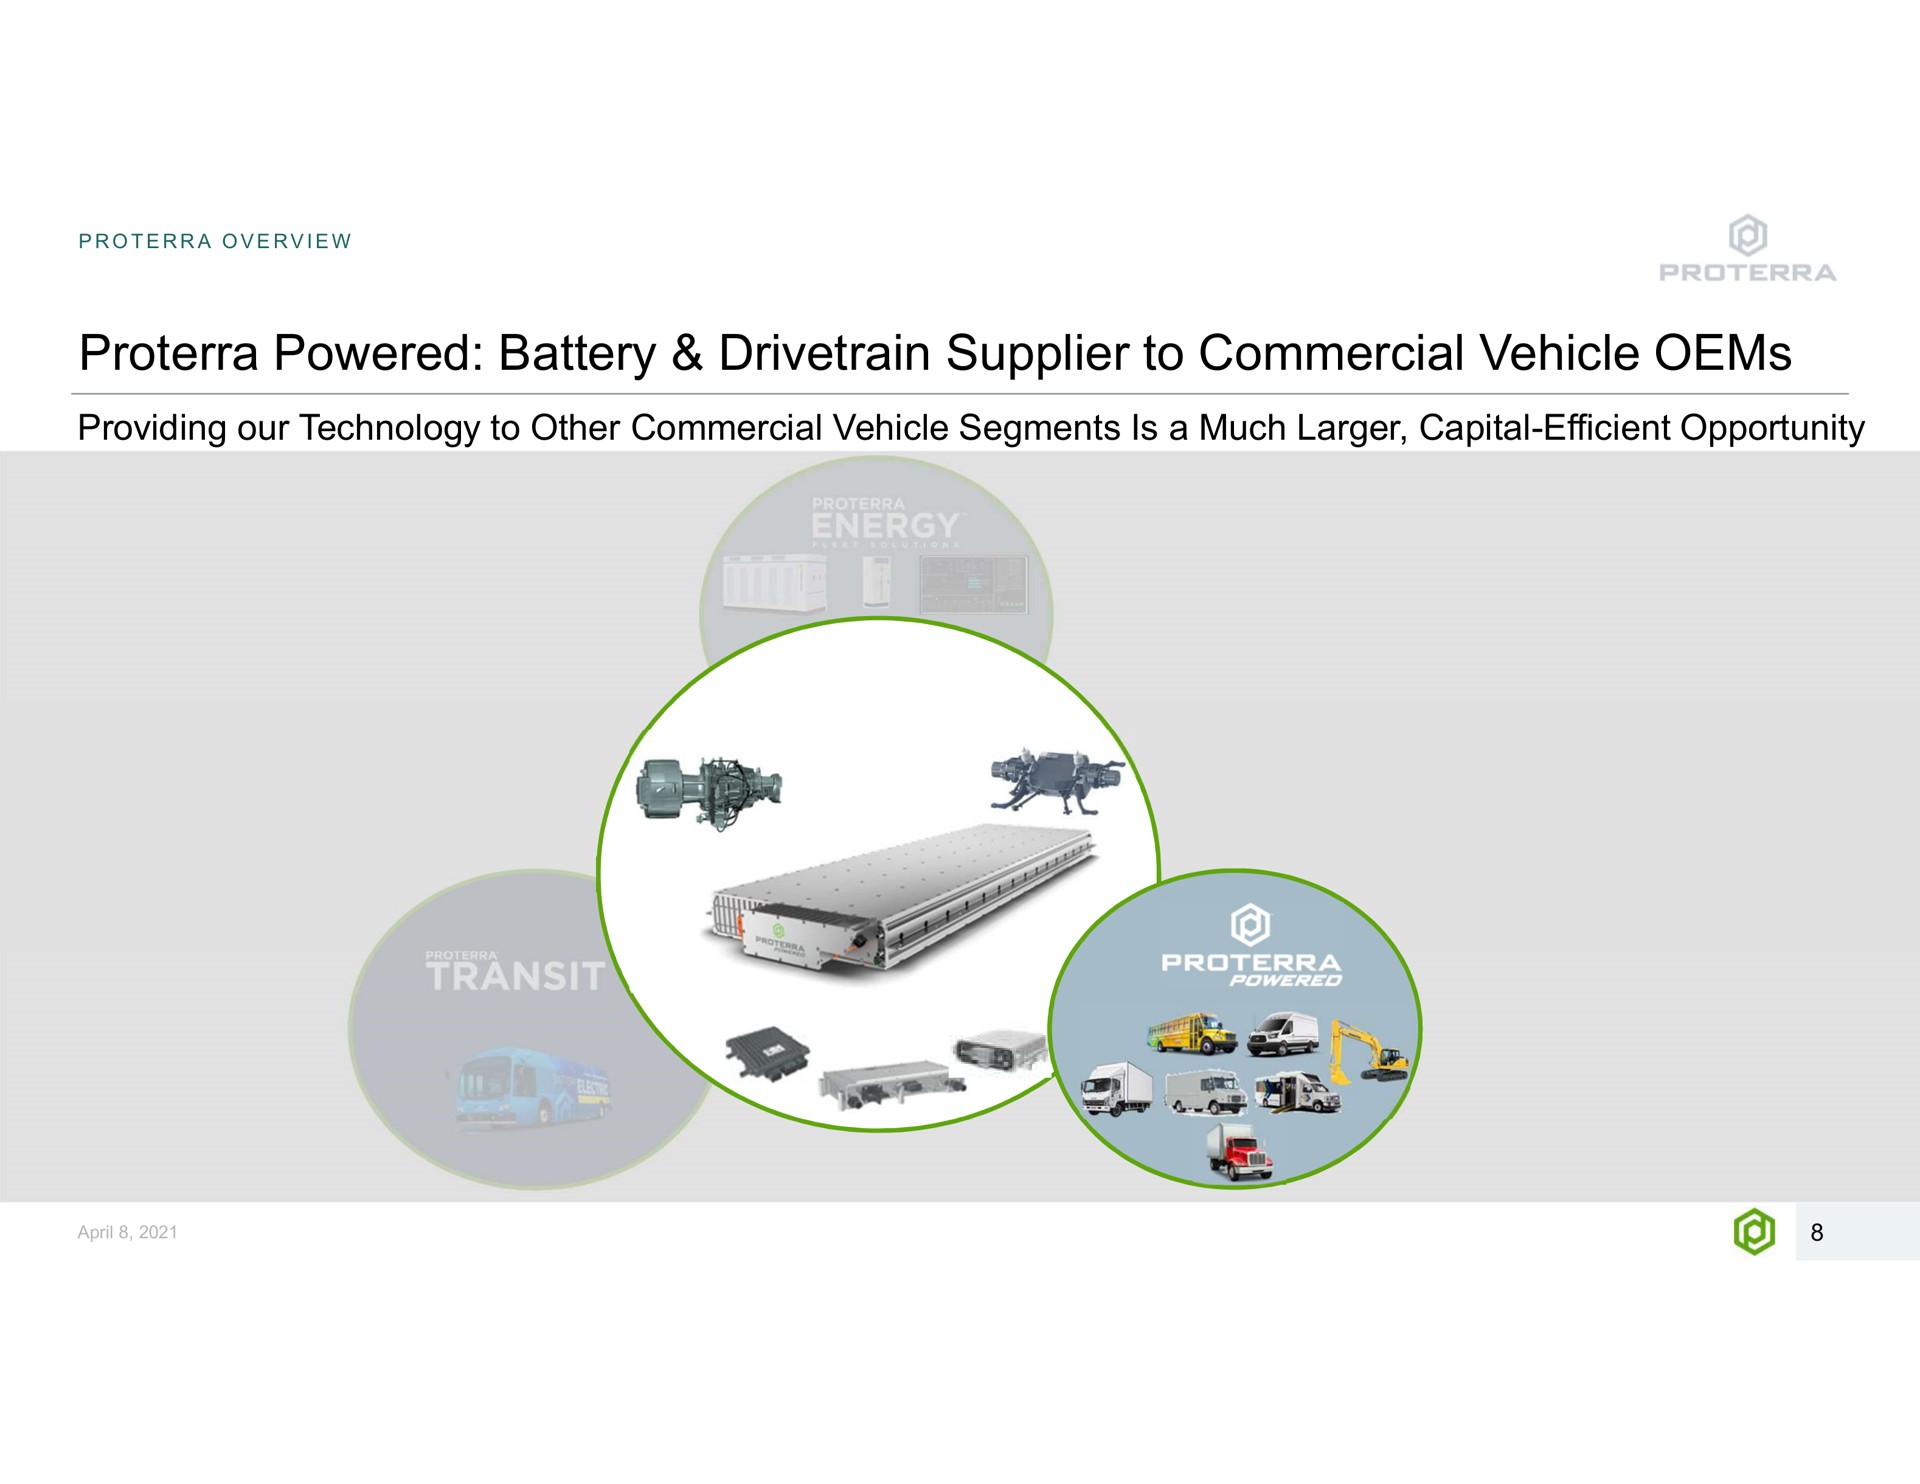 powered battery supplier to commercial vehicle overview providing our technology other segments is a much capital efficient opportunity | Proterra